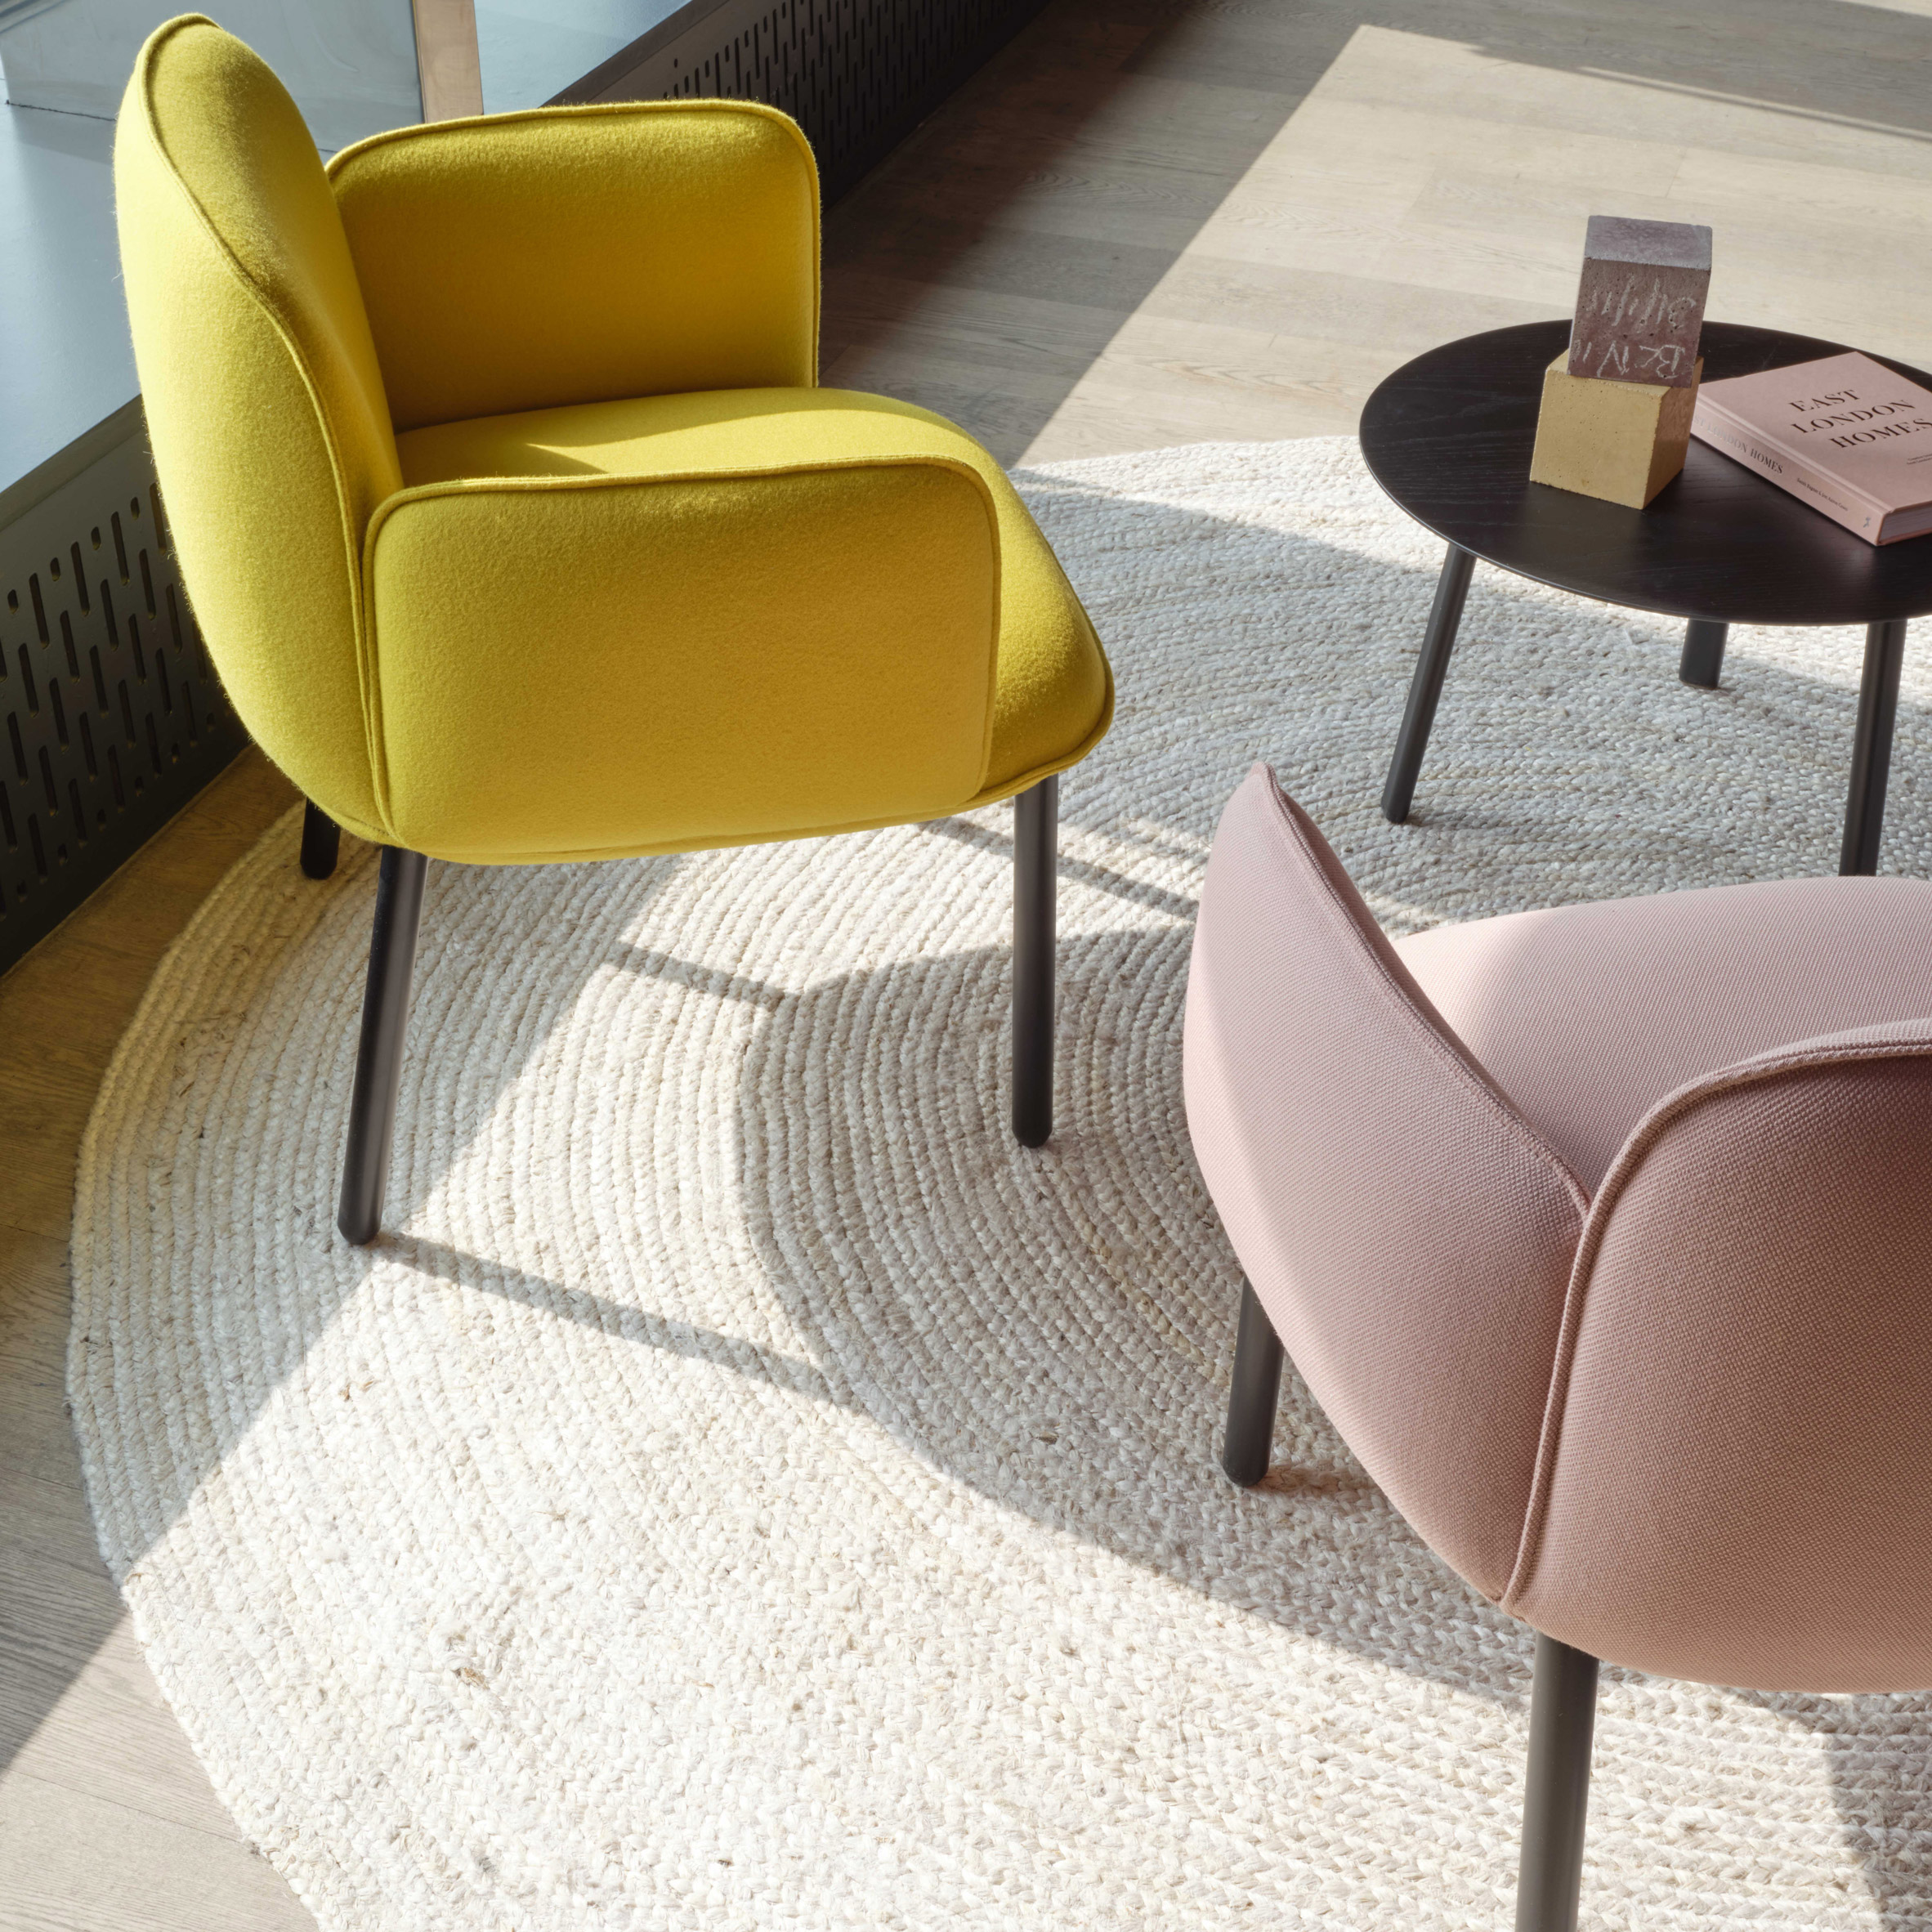 Yellow and pink plum chairs by Gabbertas Studio for Allermuir